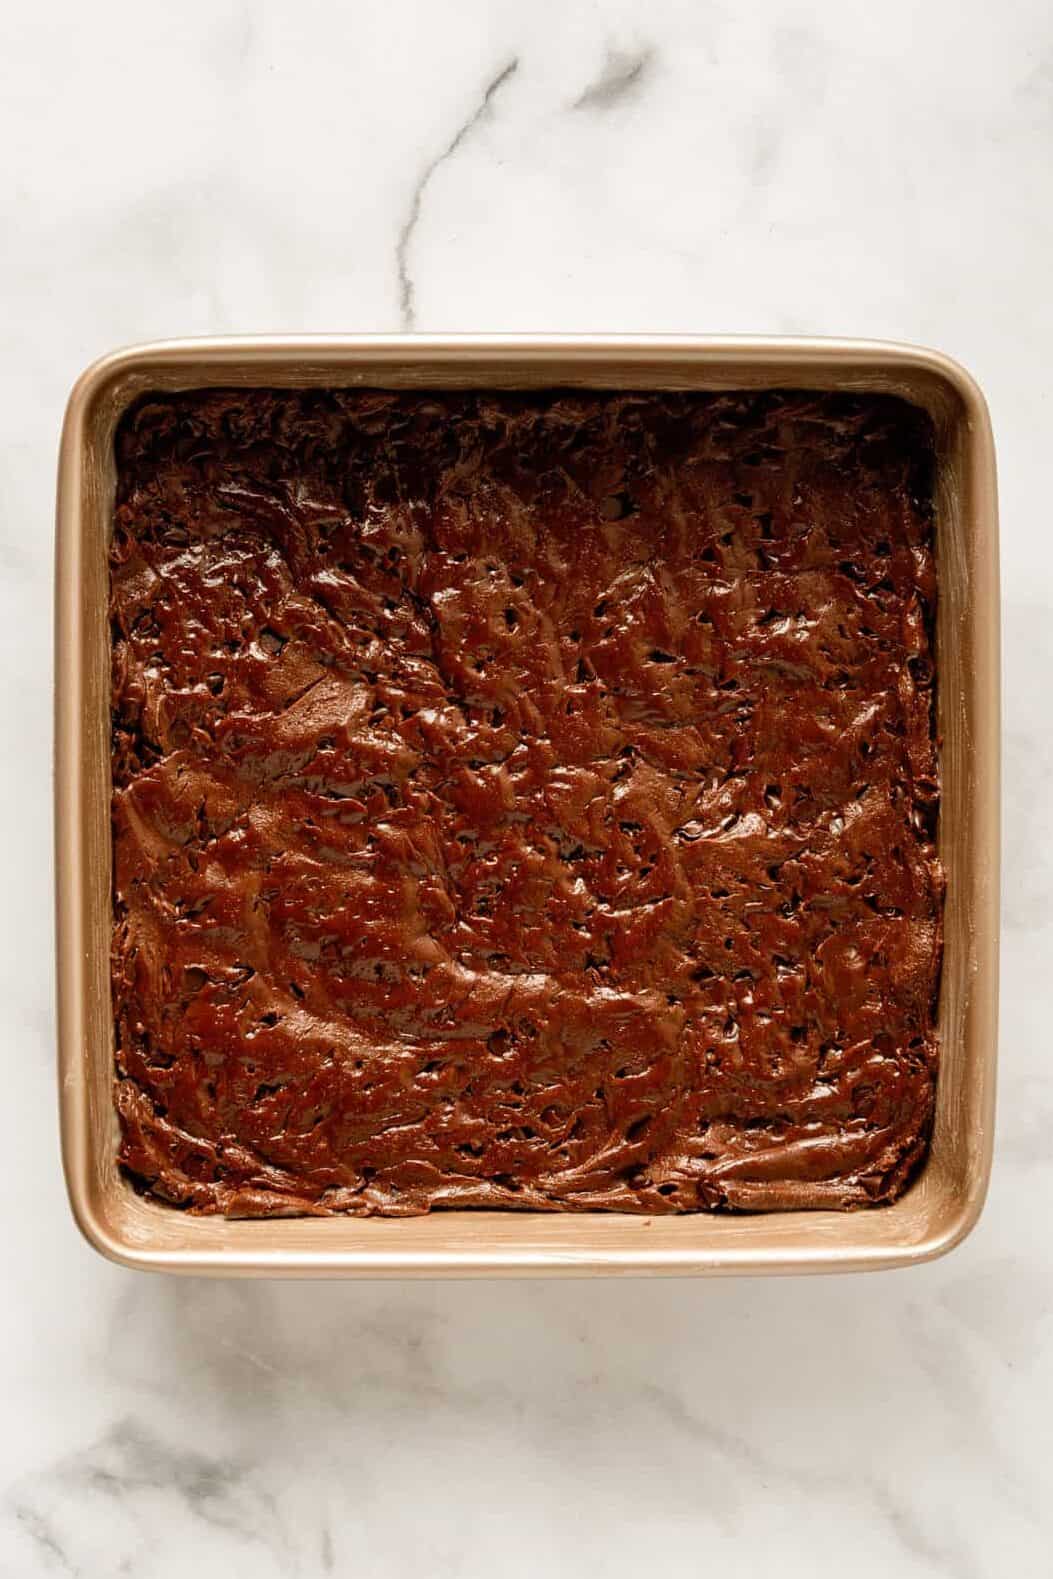 cake mix brownie in an 8x8 baking dish